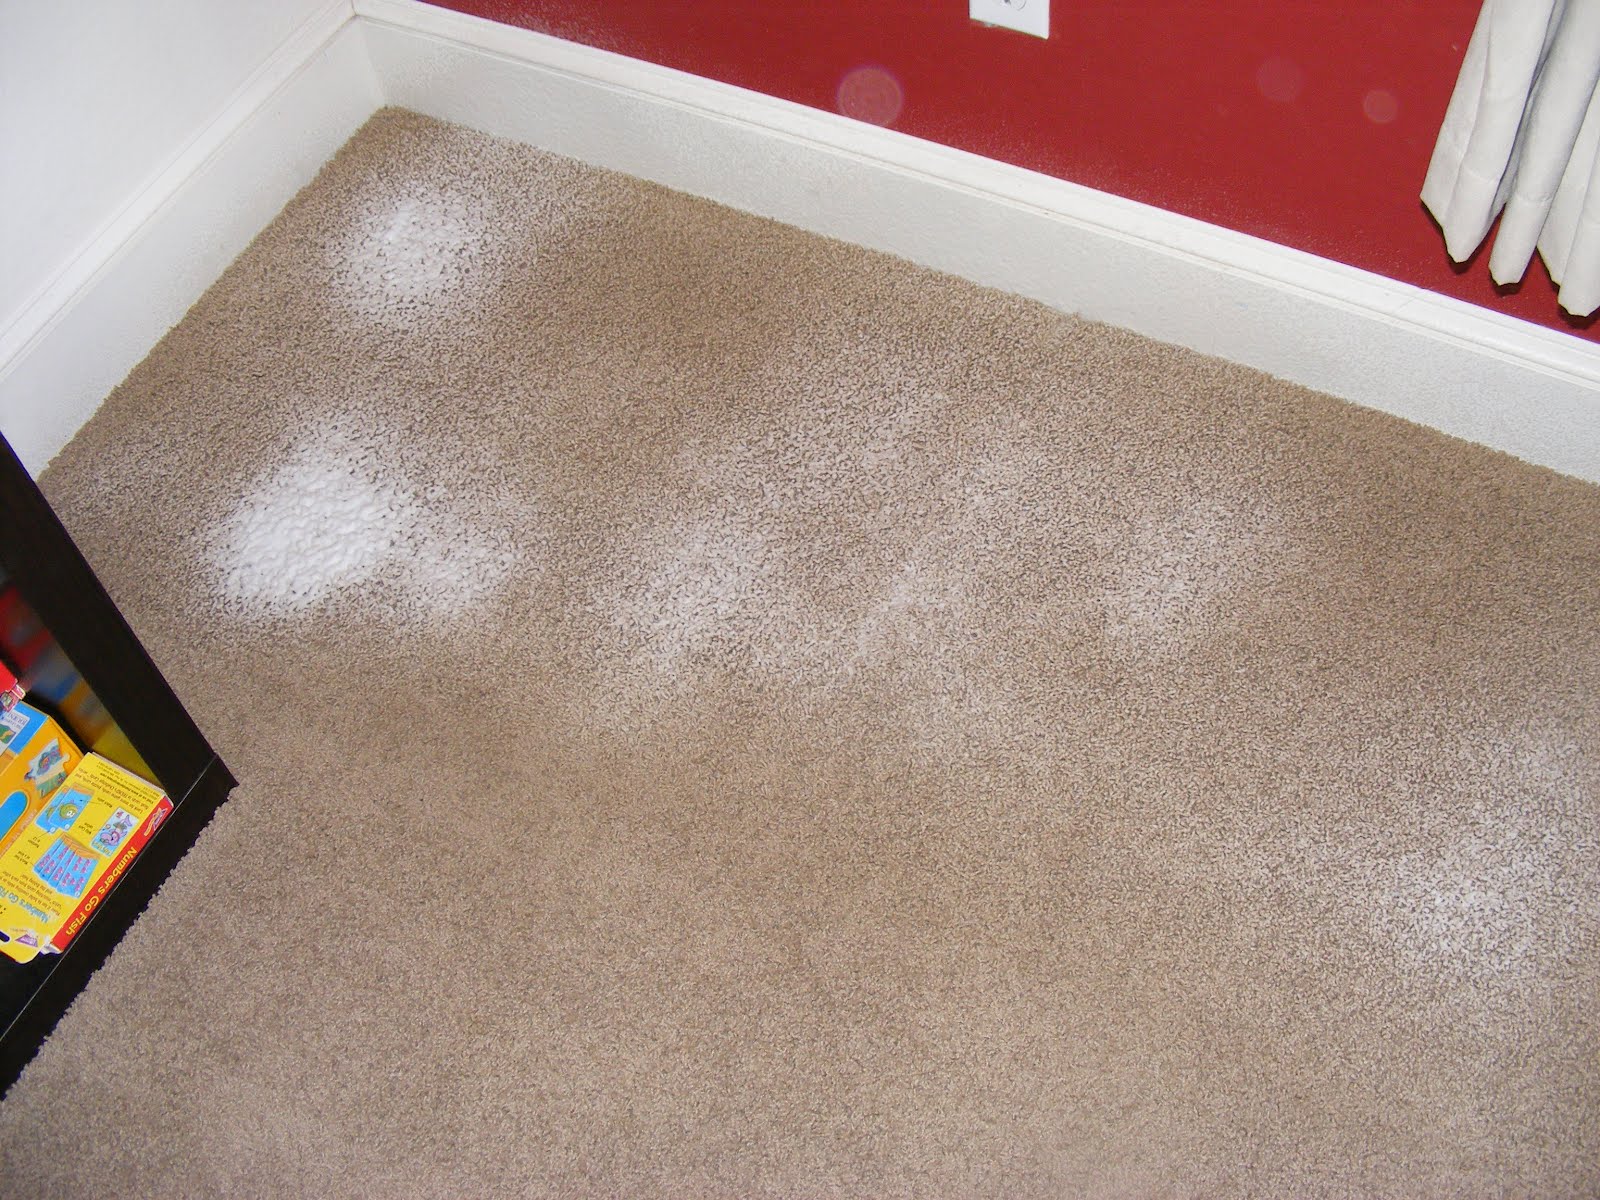 center Cleaning Your Carpet Without a Carpet Cleaner center